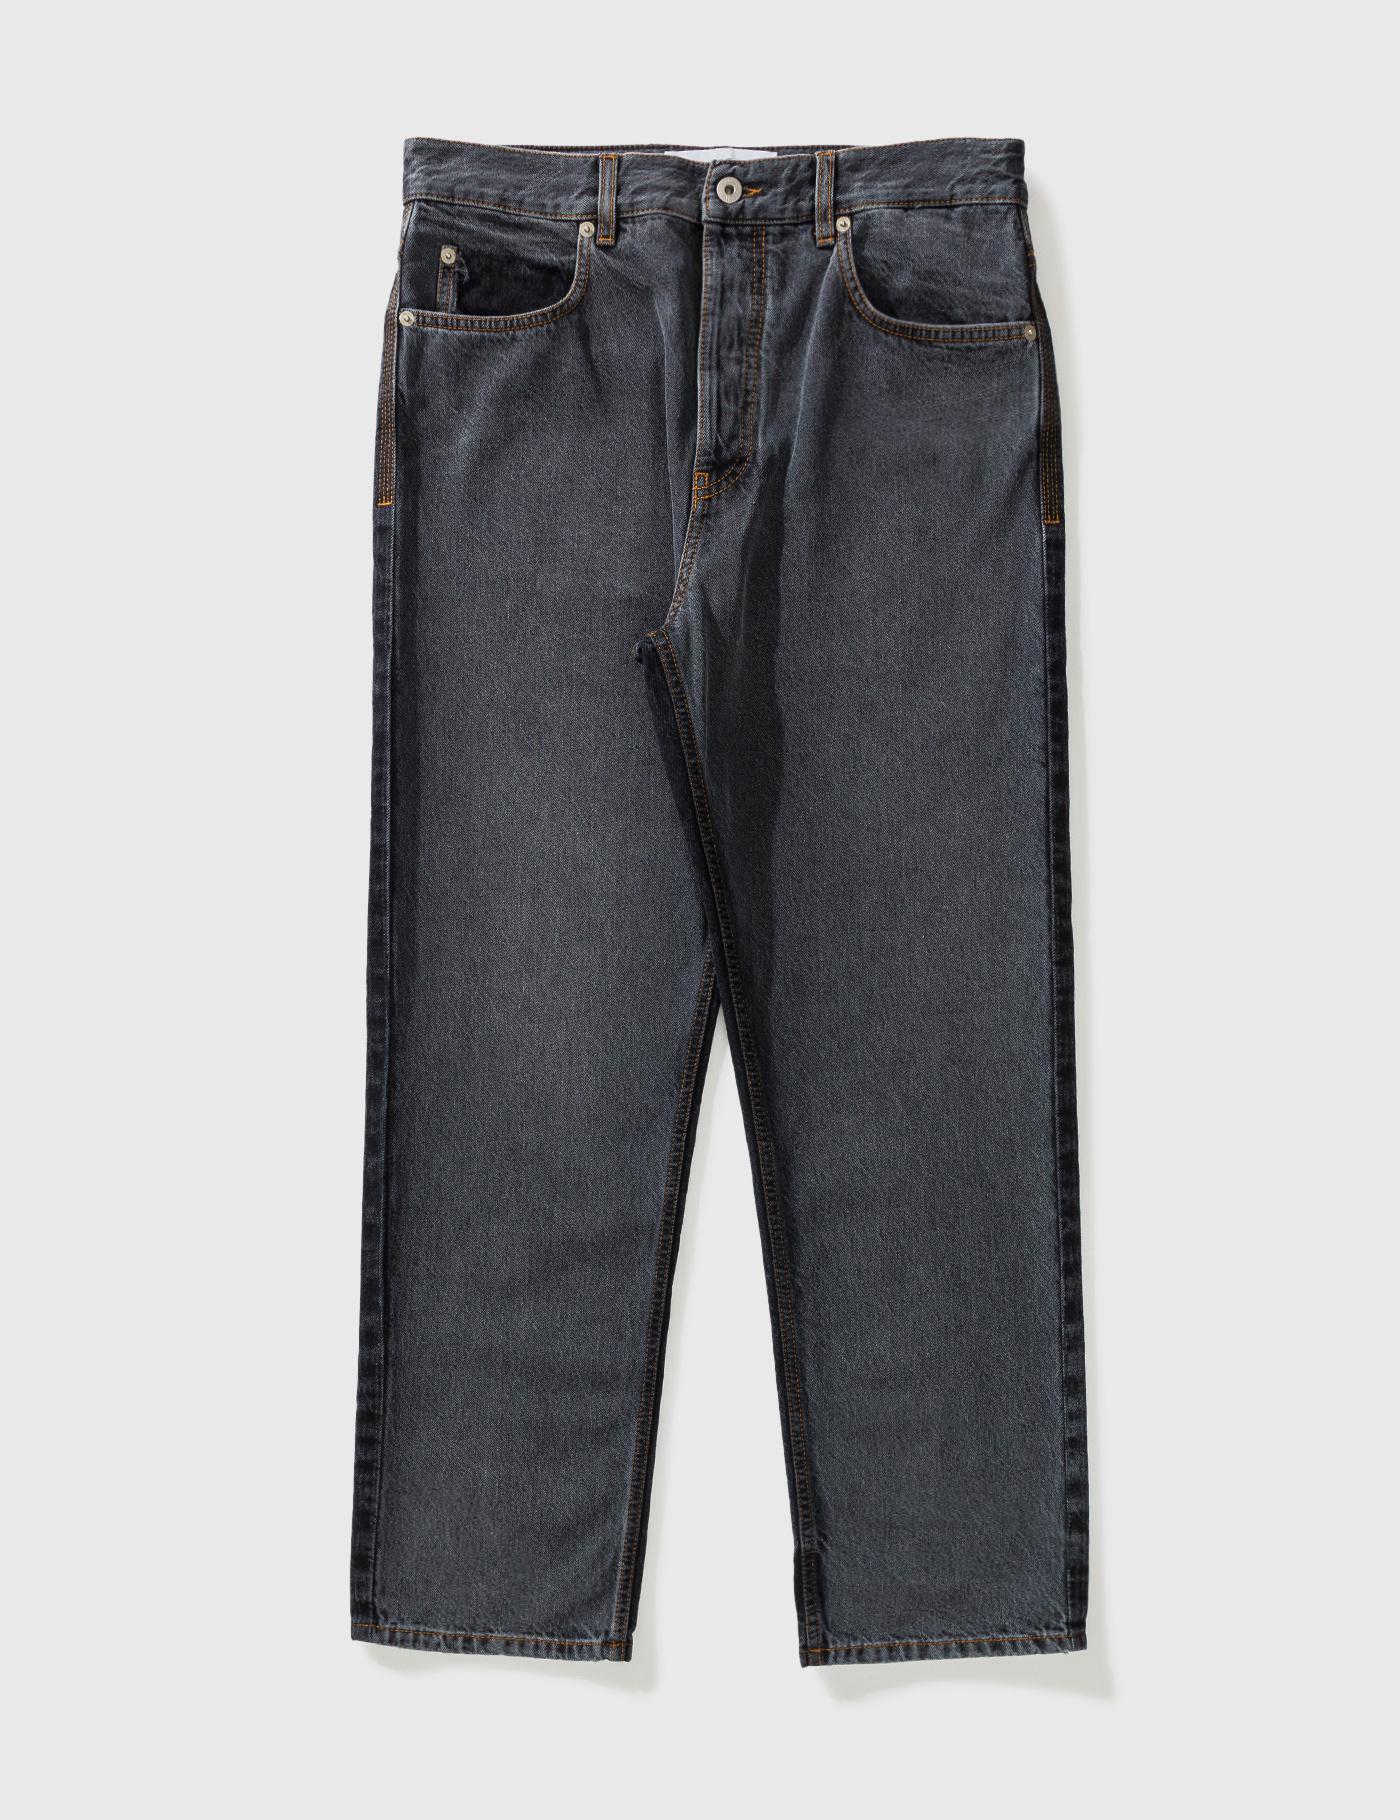 Faded Denim Trousers by LOEWE | jellibeans